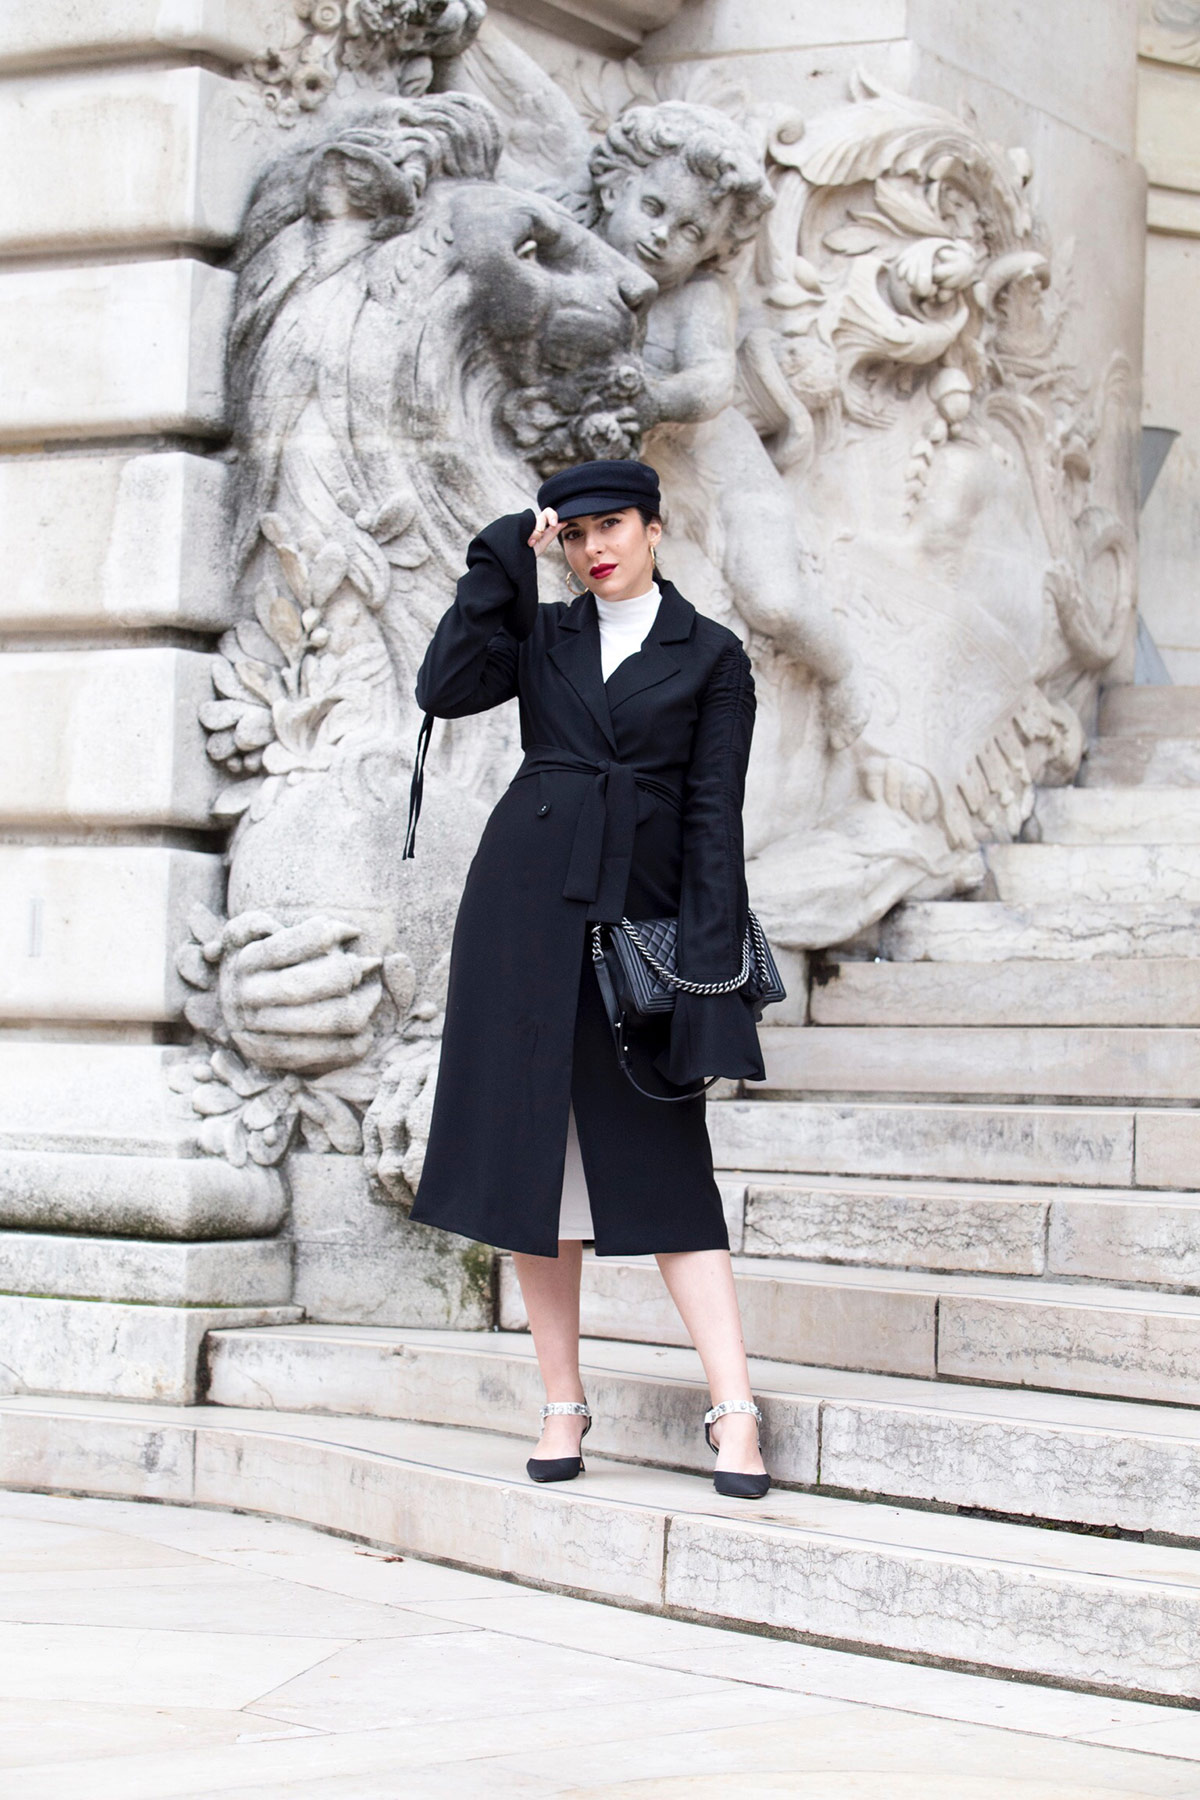 Black trench dress and baker boy hat for John Galliano Show during PFW Paris Fashion Week by Stella Asteria - Fashion & Lifestyle Blogger - Paris Fashion Week Street Style - Chanel boy bag, trench dress and total black look